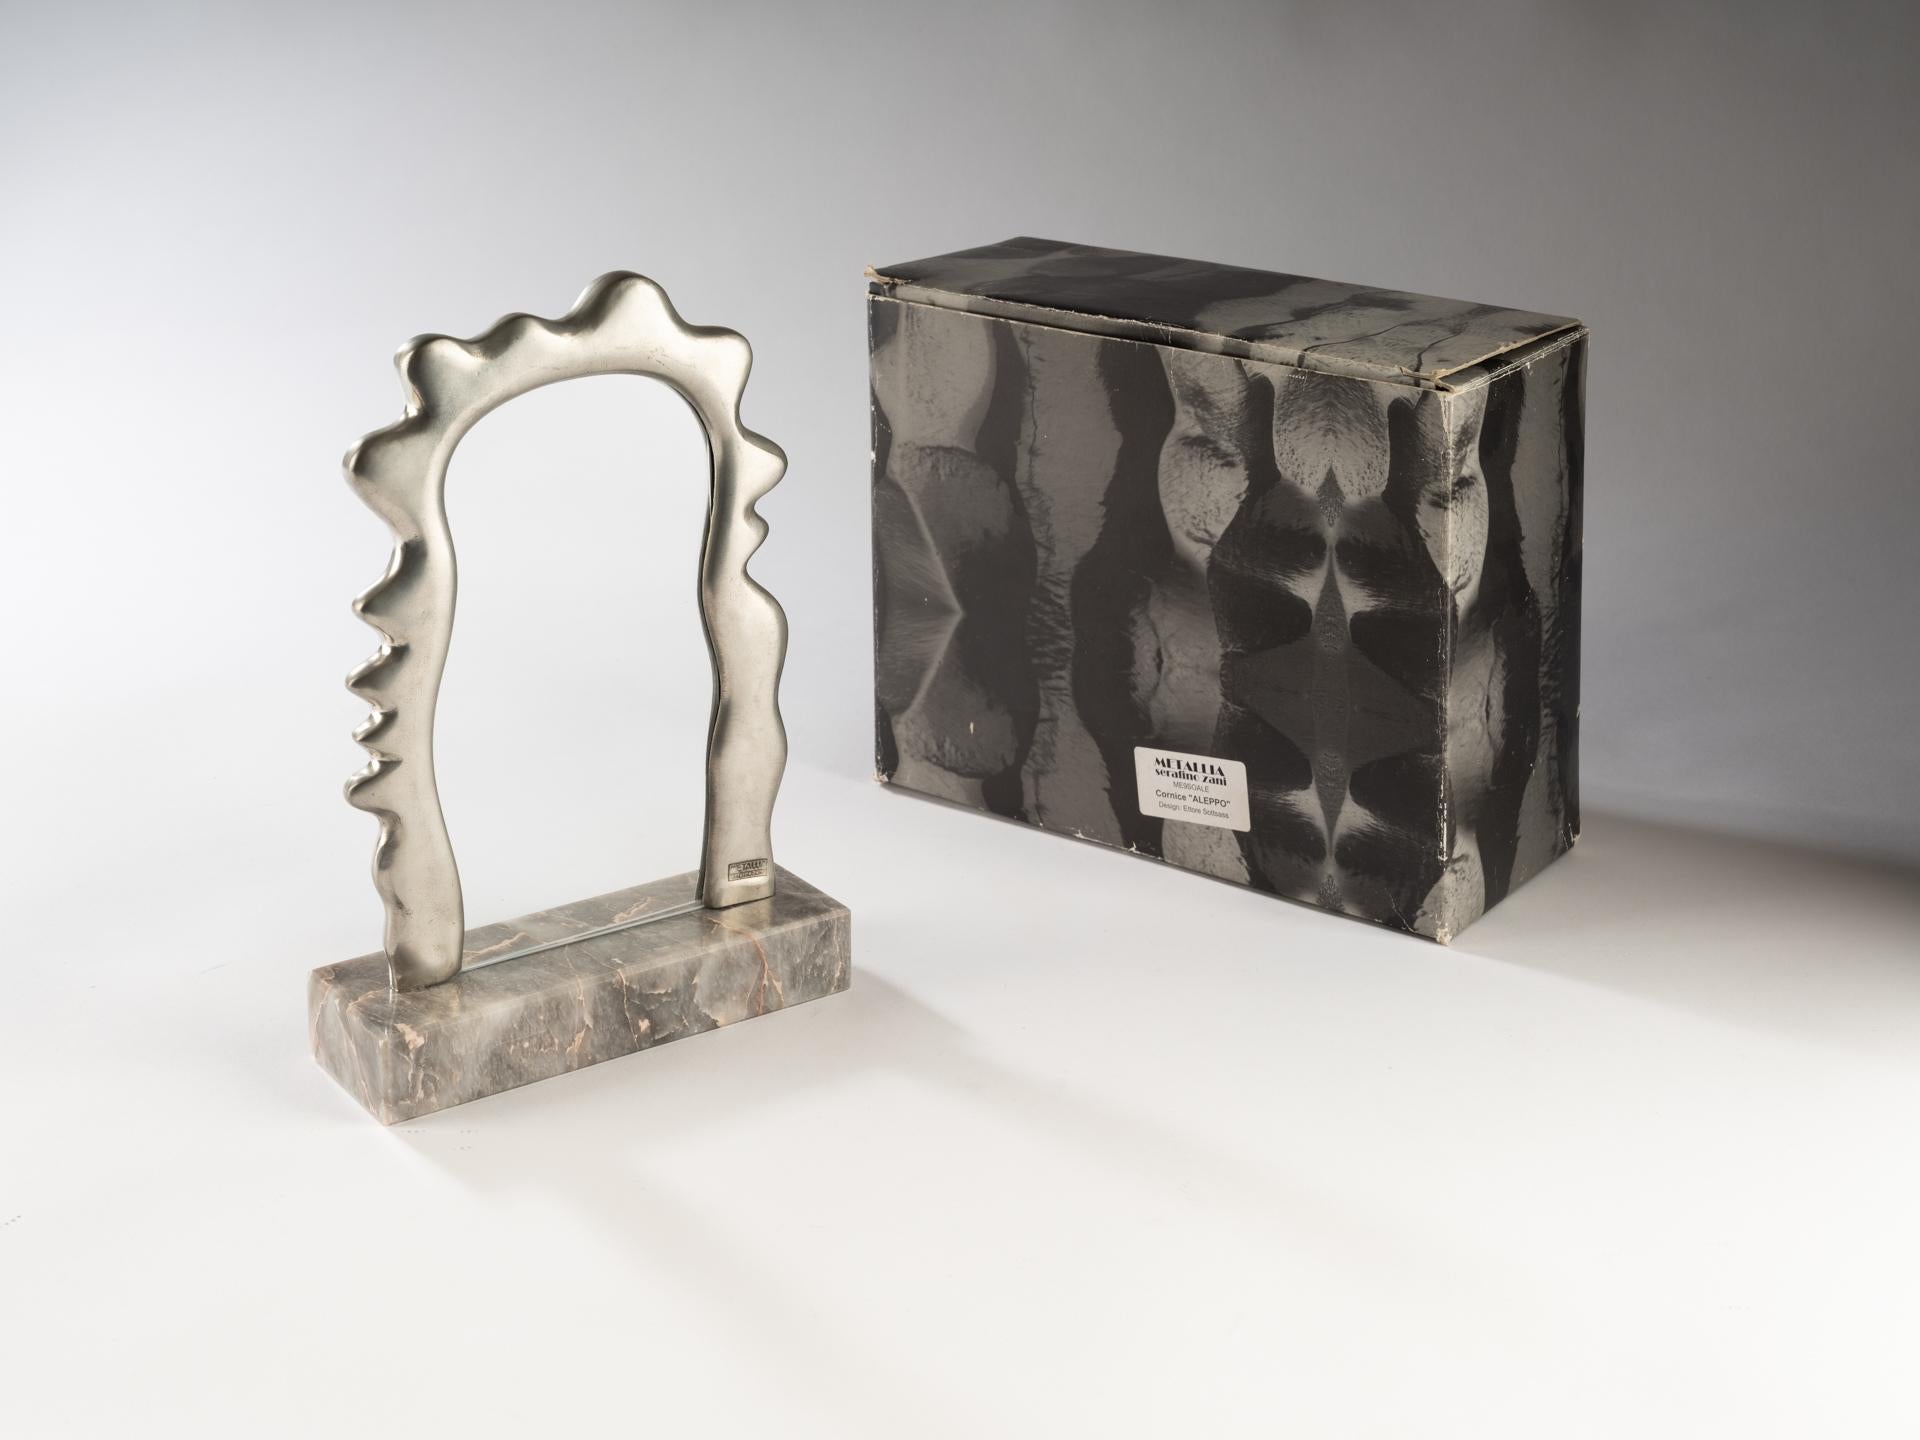 The Aleppo Frame designed by Ettore Sottsass for Metallia Serafino Zani in 1999 is made of Pewter, Glass and Grey Marble. The shape of this small frame was most likely inspired by the Ultrafragola Mirror, that Sottsass designed almost 30 years